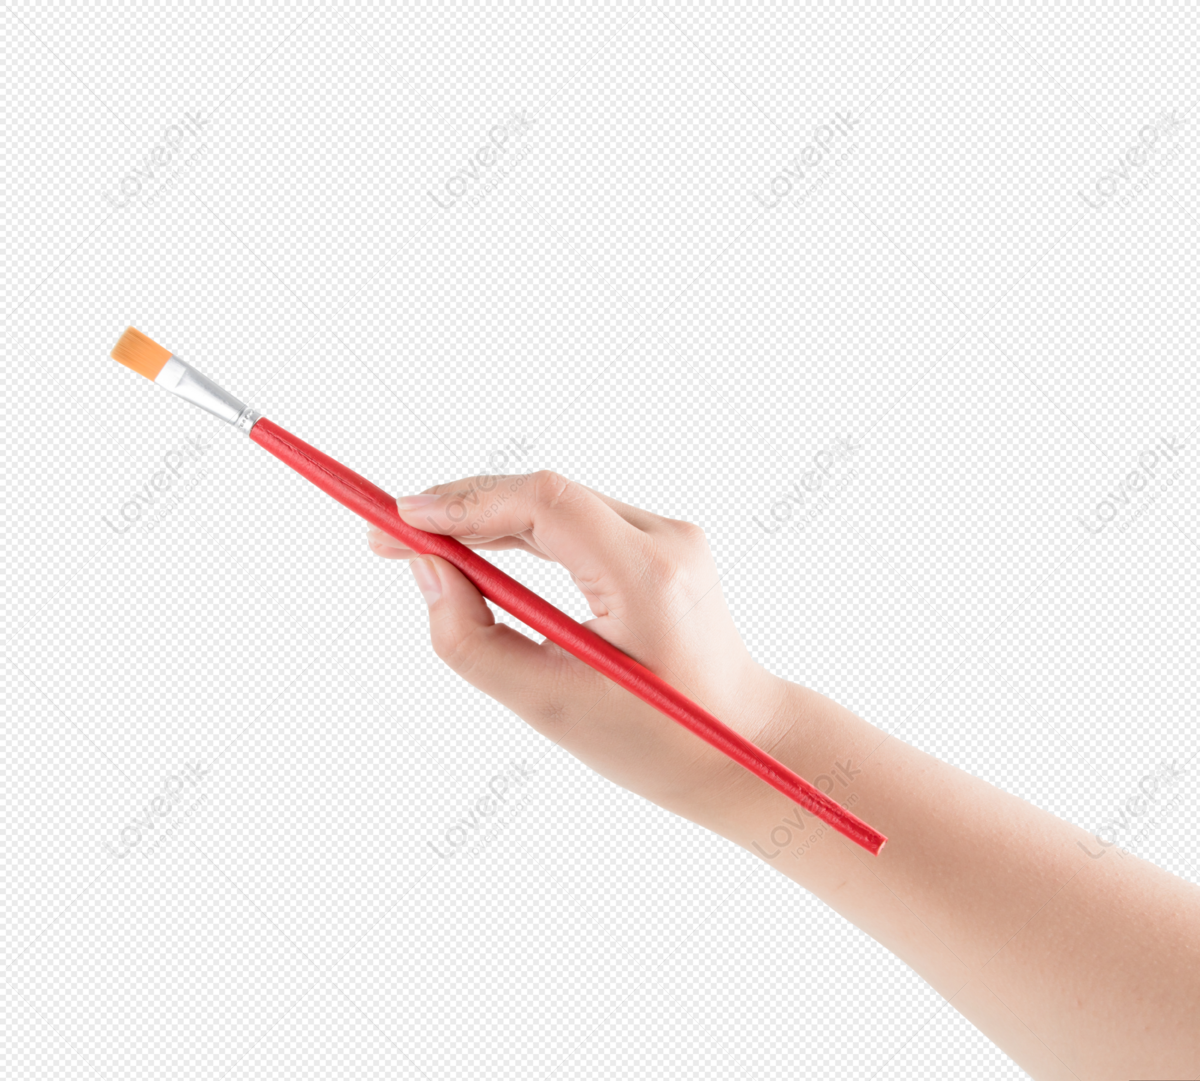 paint brush in hand PNG image transparent image download, size